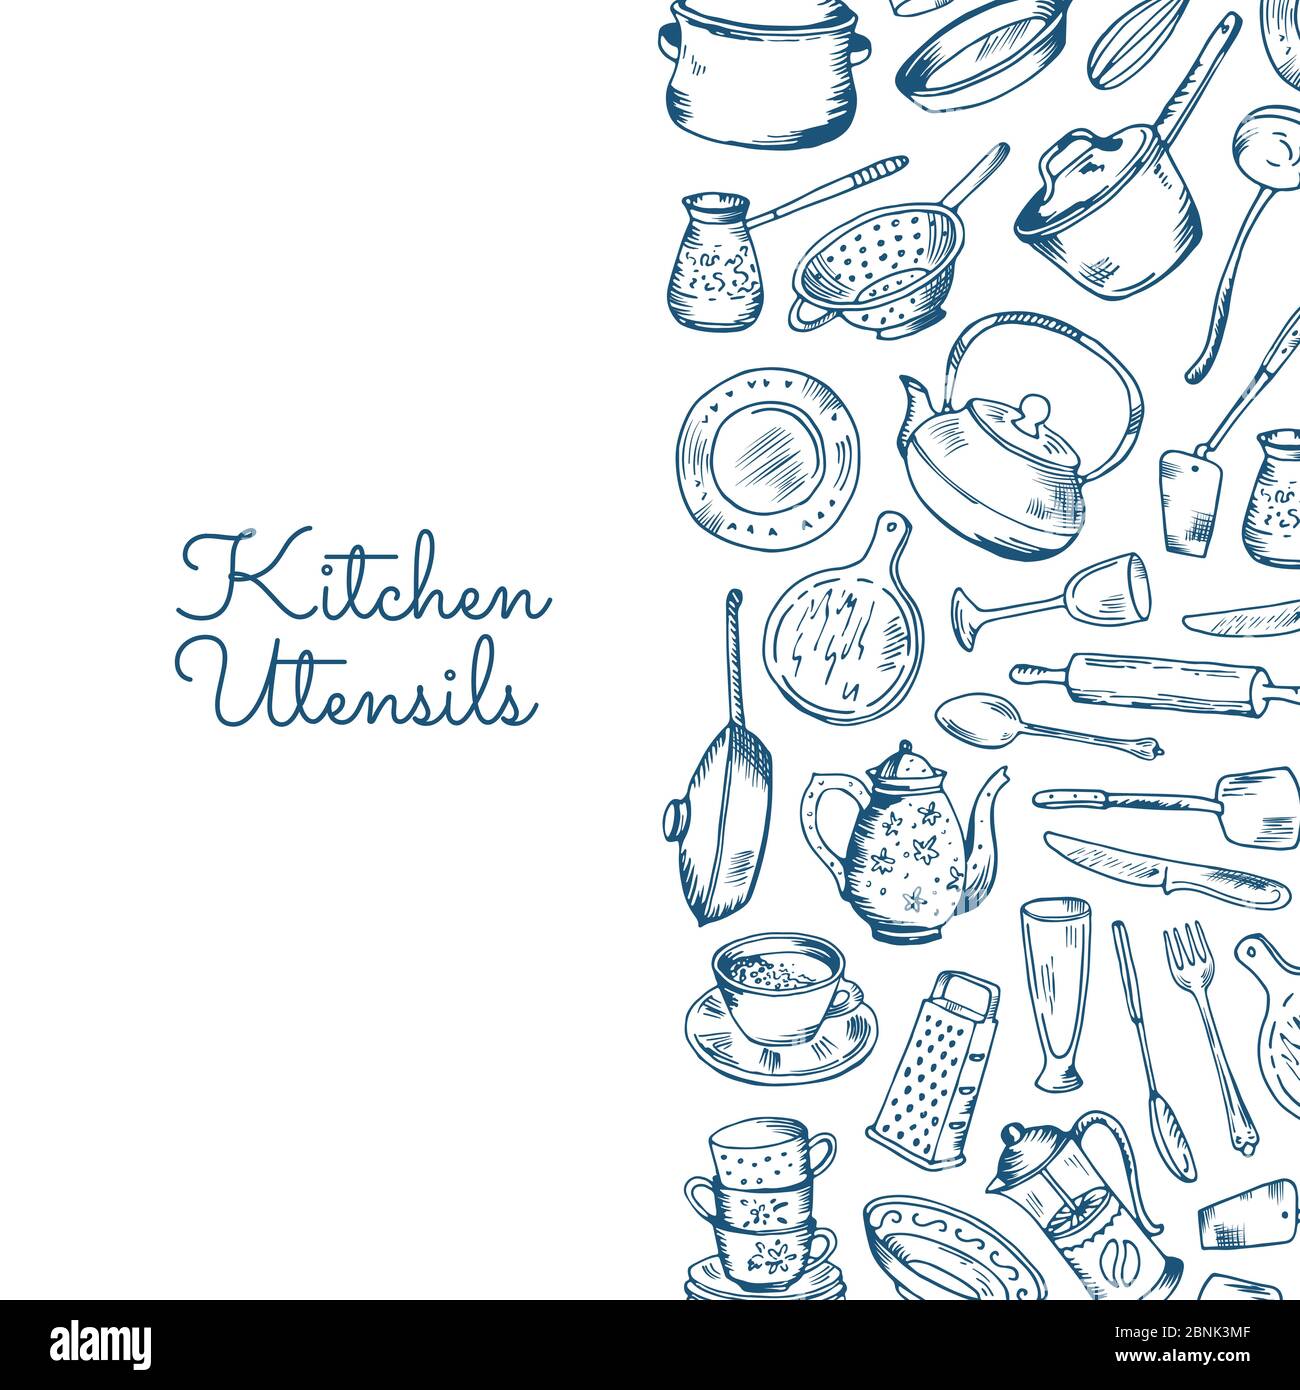 Vector background with kitchen utensils with place for text Stock Vector